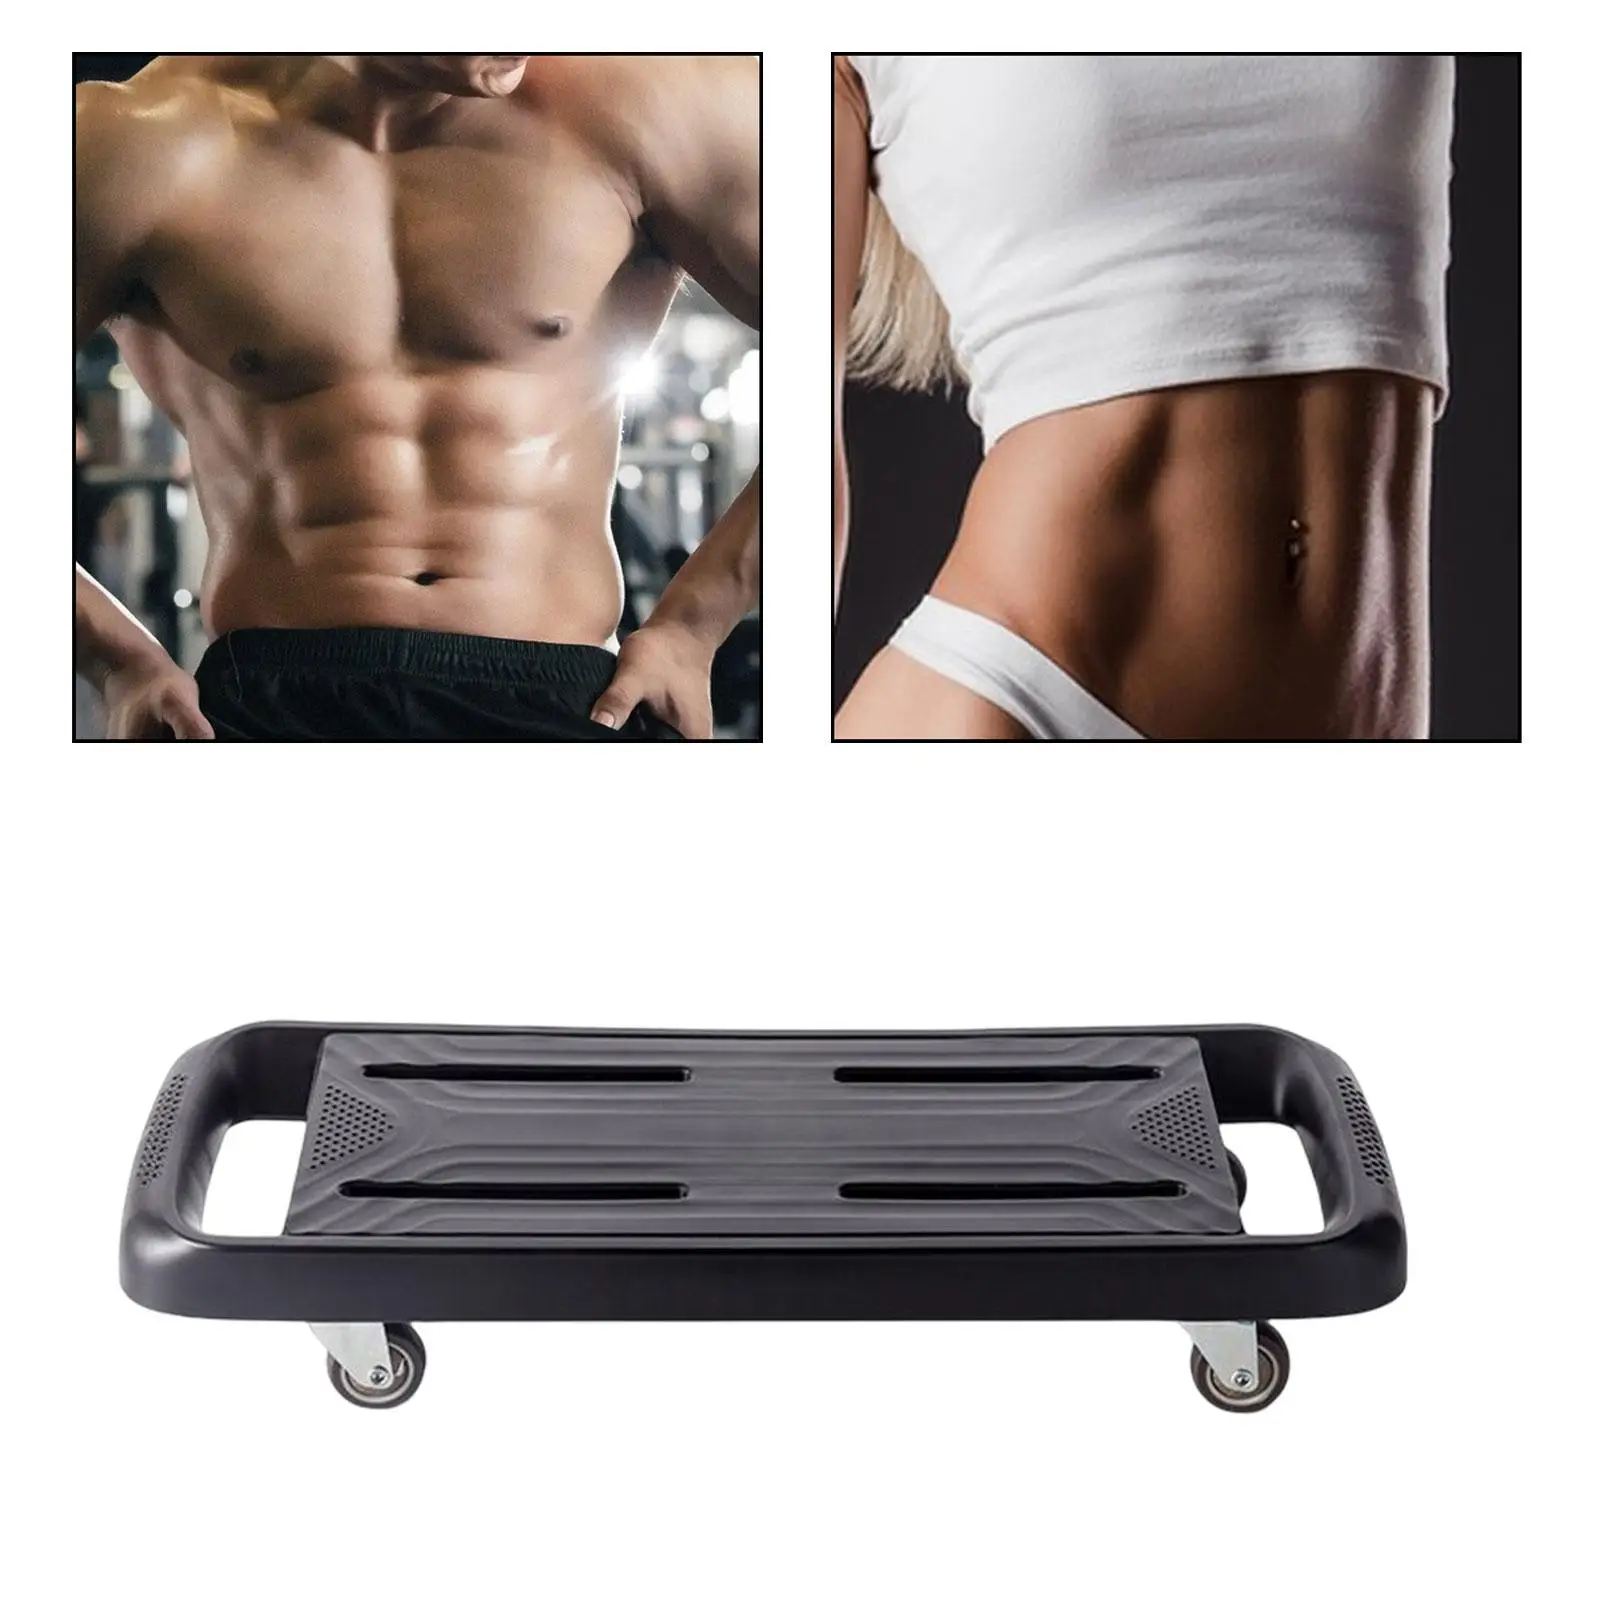 Board Core Workout Training Gym Equipment for Fitness Ab Training